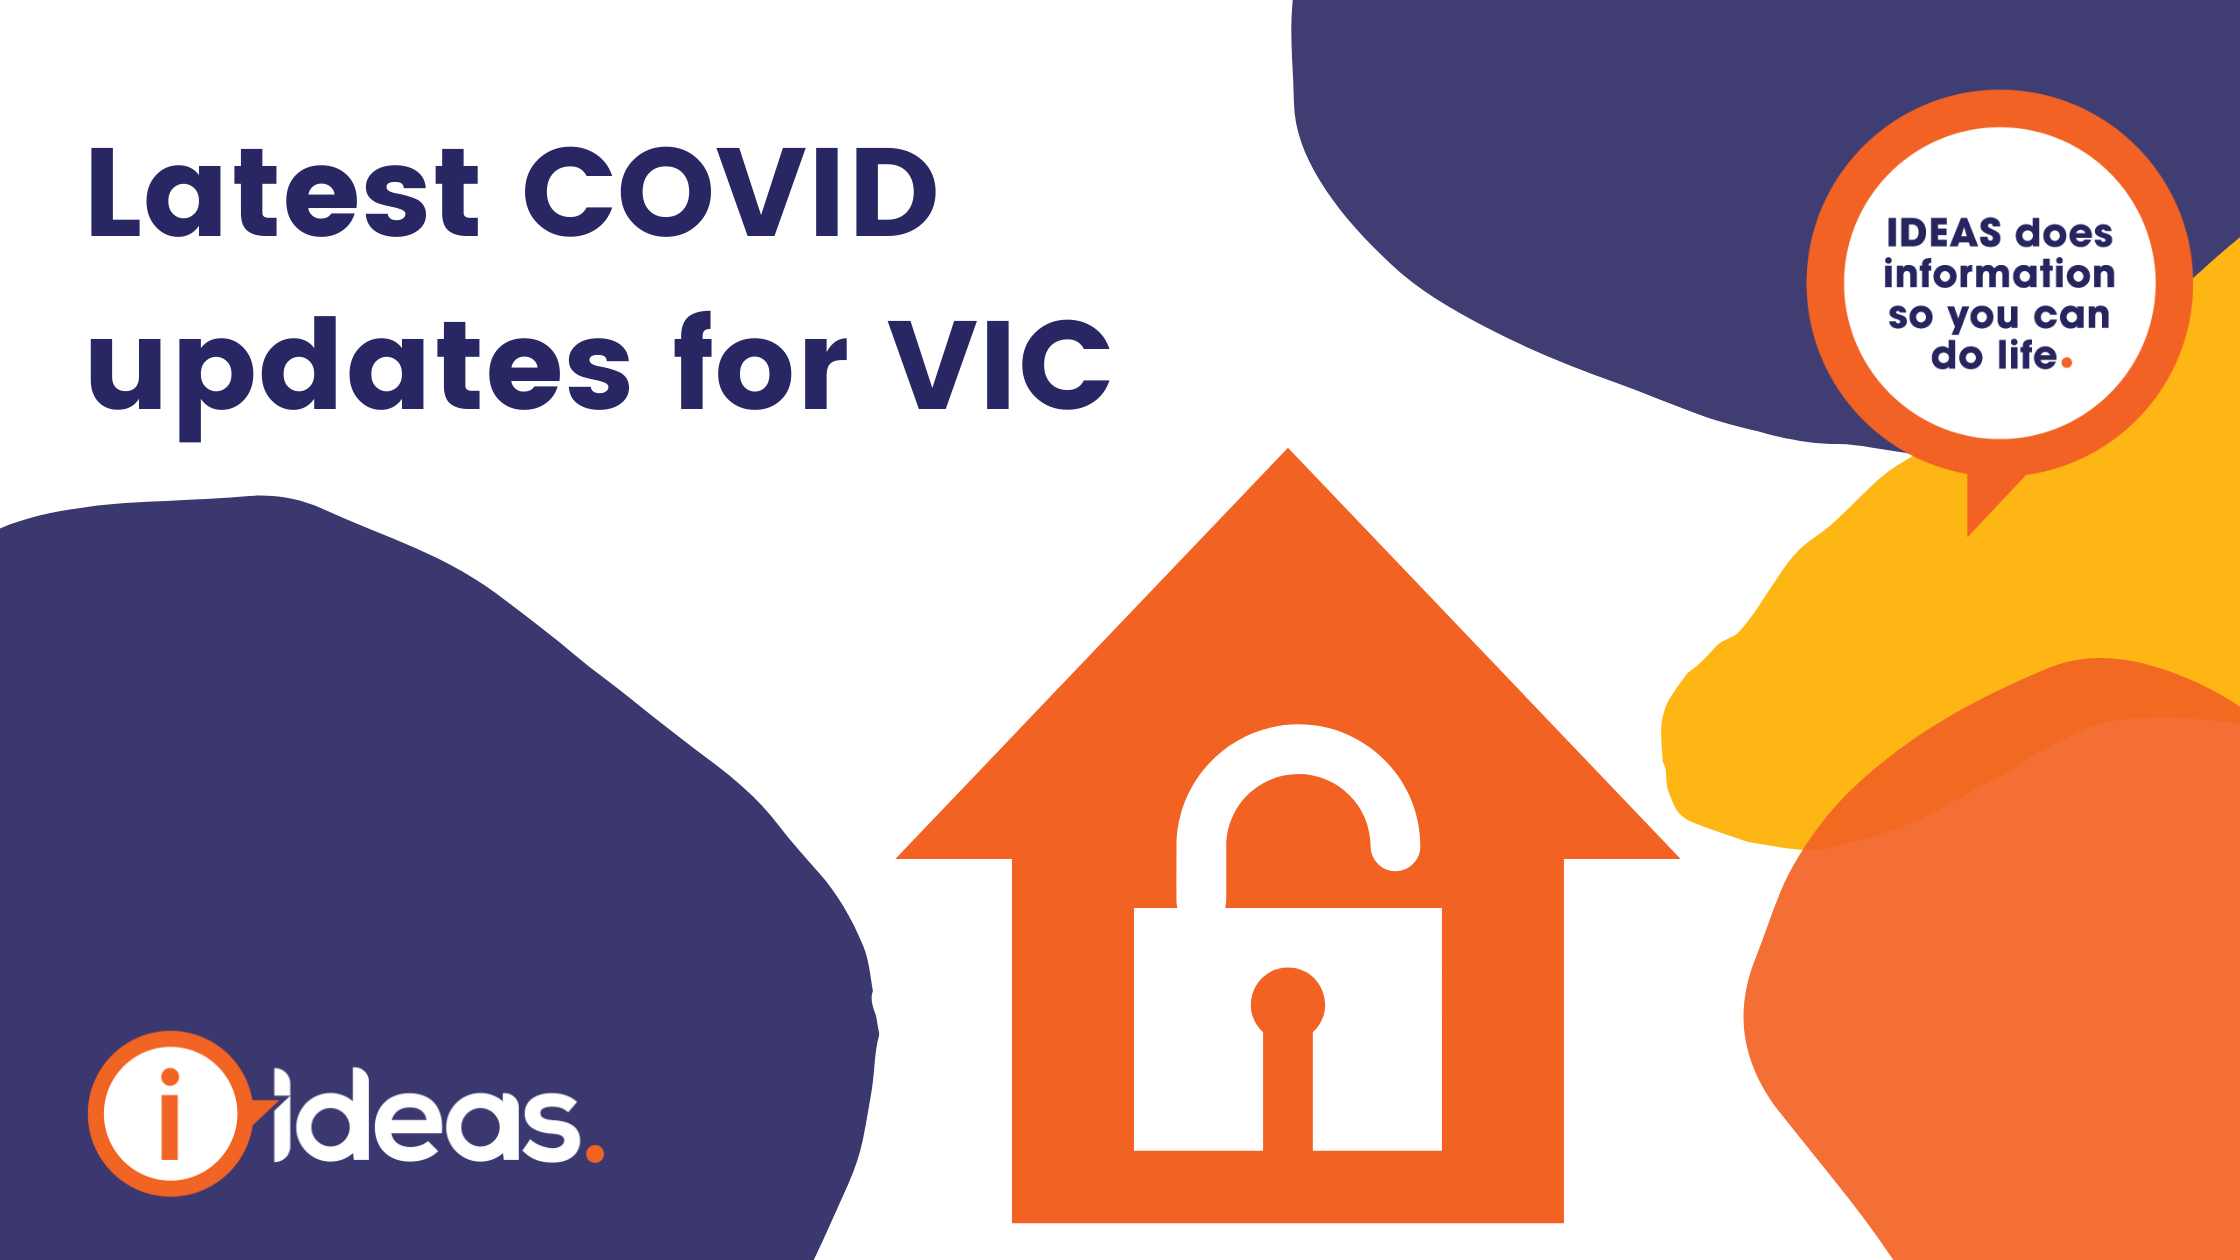 Latest COVID updates for VIC. House with unlocked padlock symbol. i ideas. IDEAS does information so you can do life. 